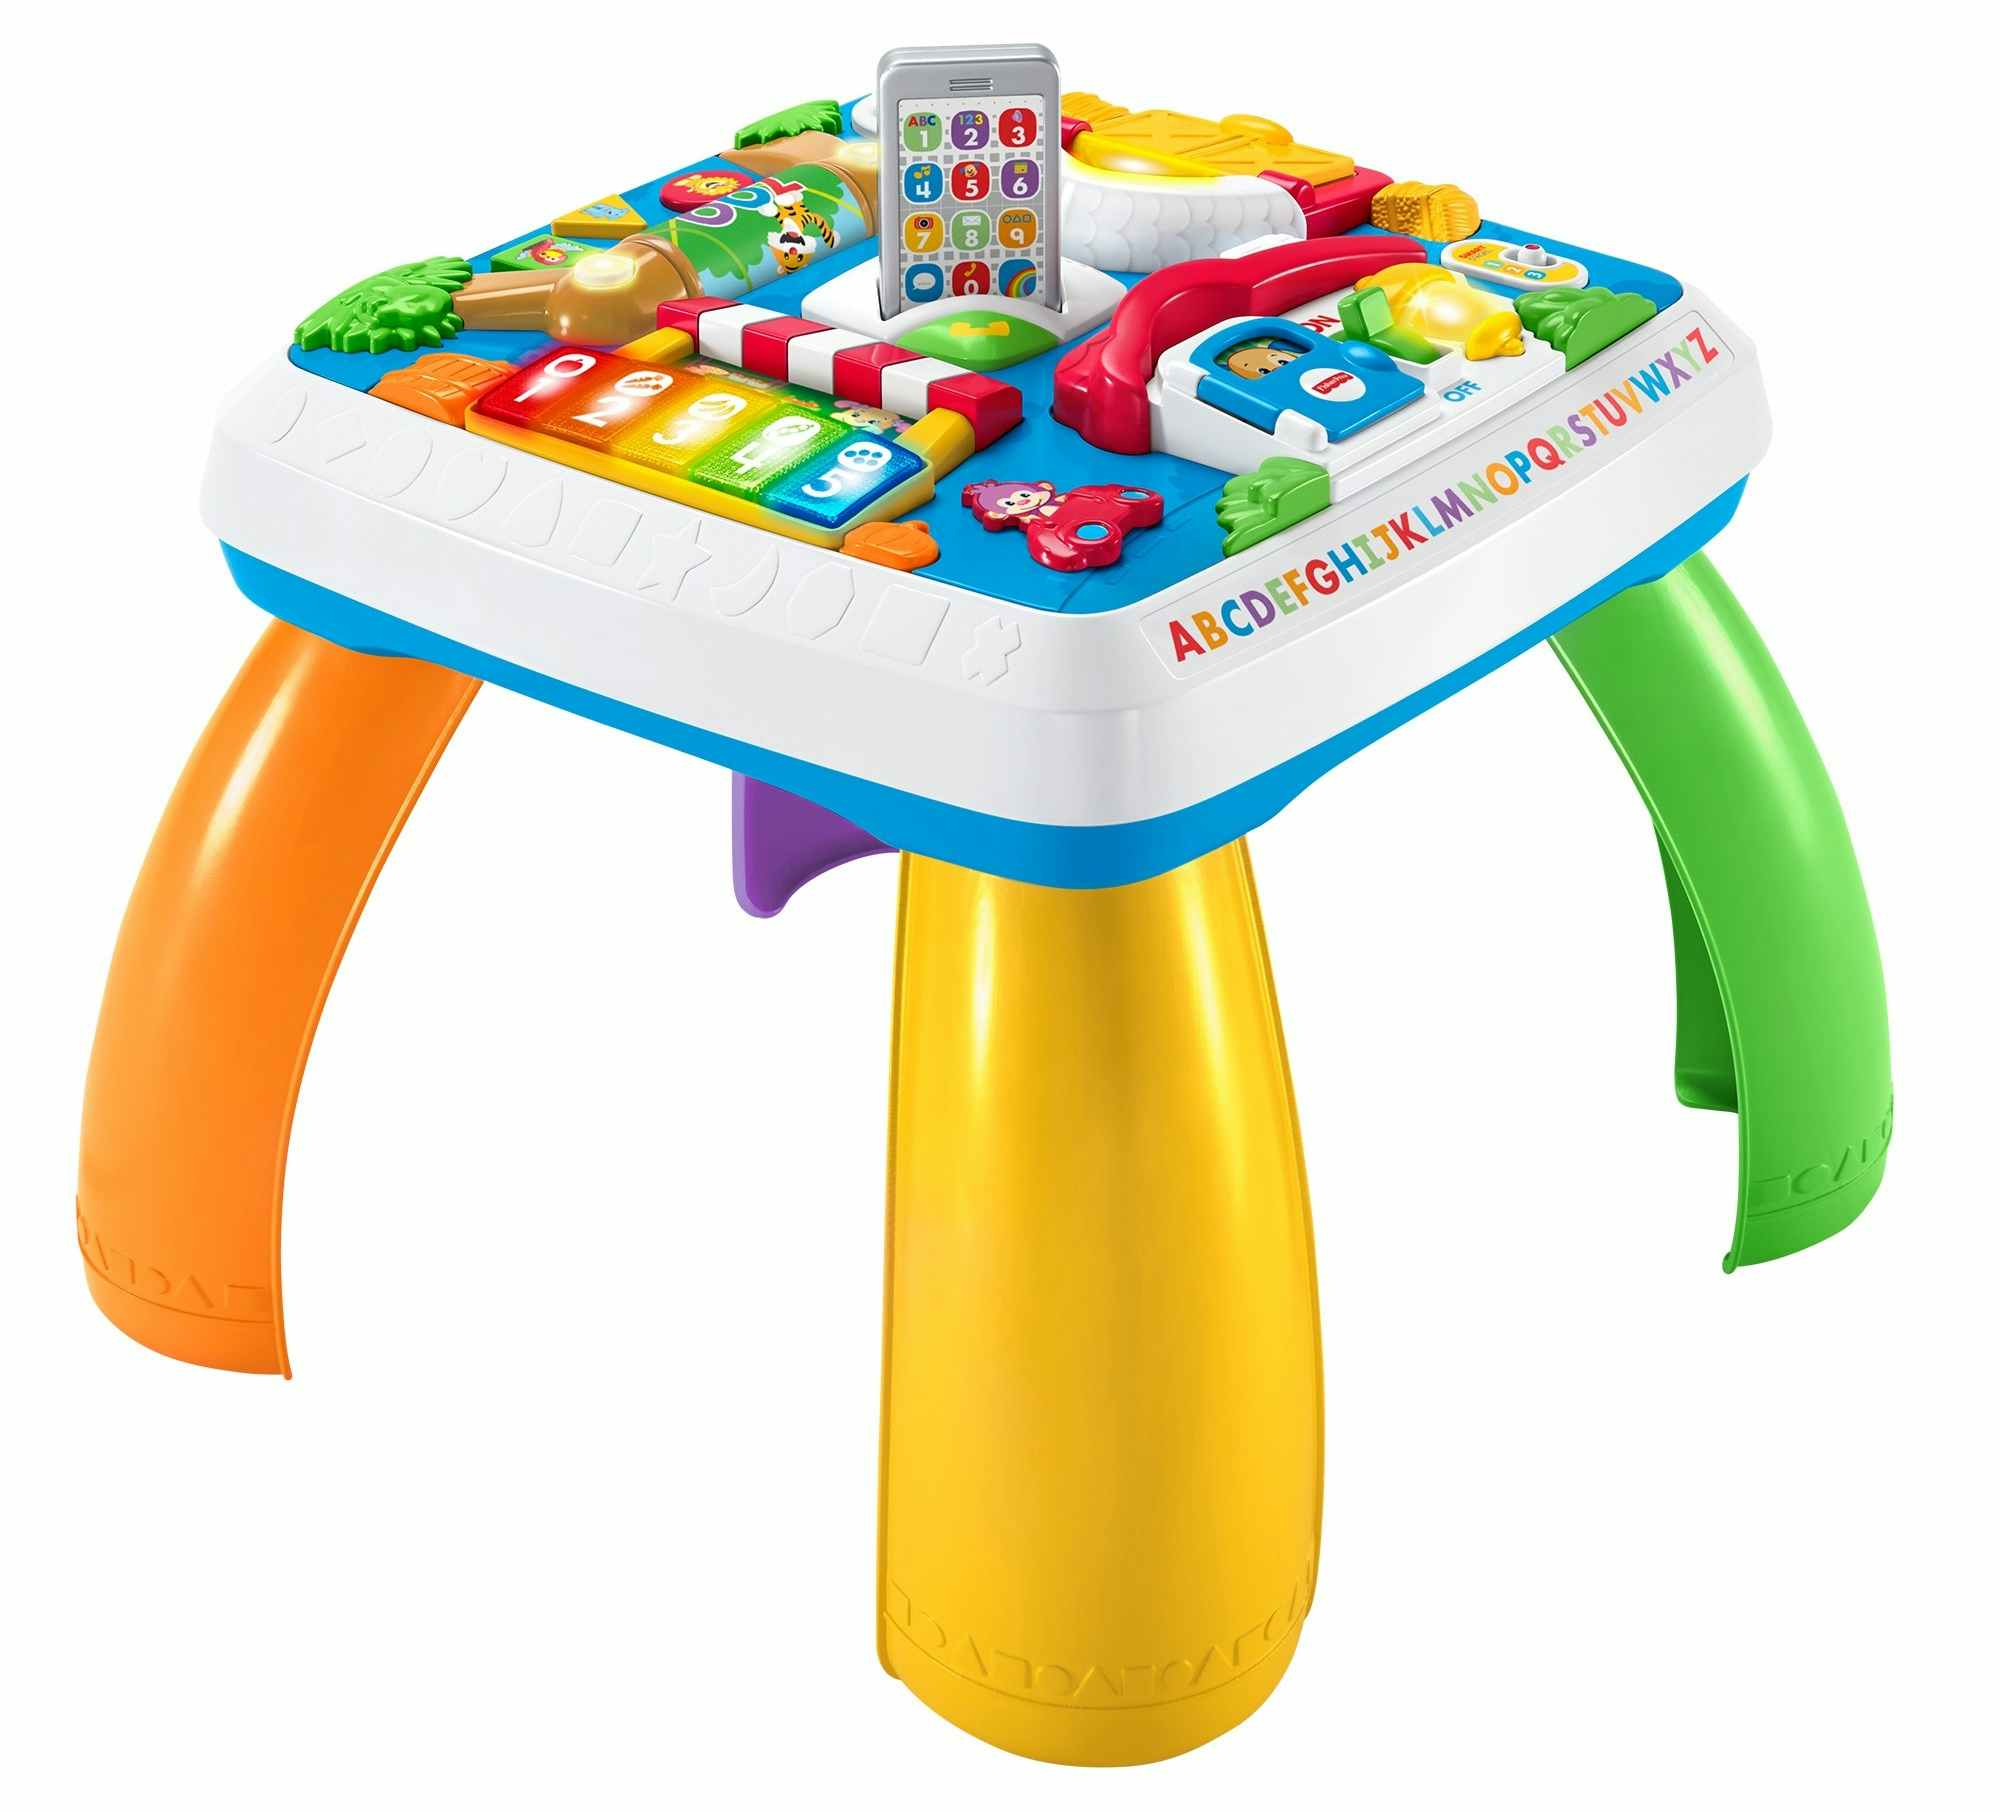 walmart-fisher-price-learning-table-021221